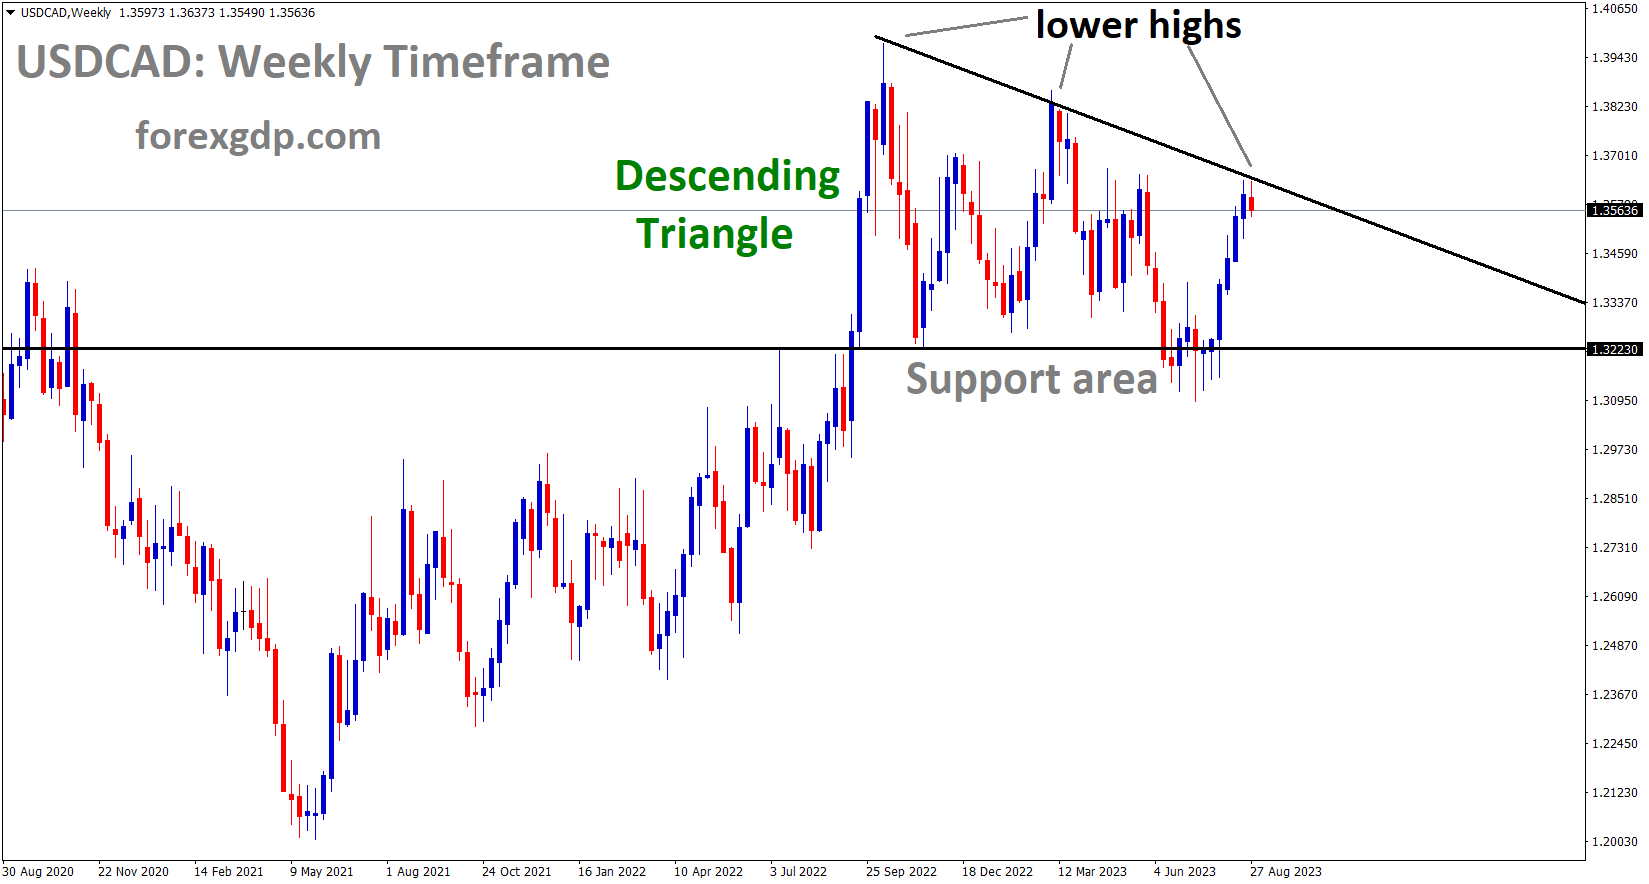 USDCAD is moving in the Descending triangle pattern